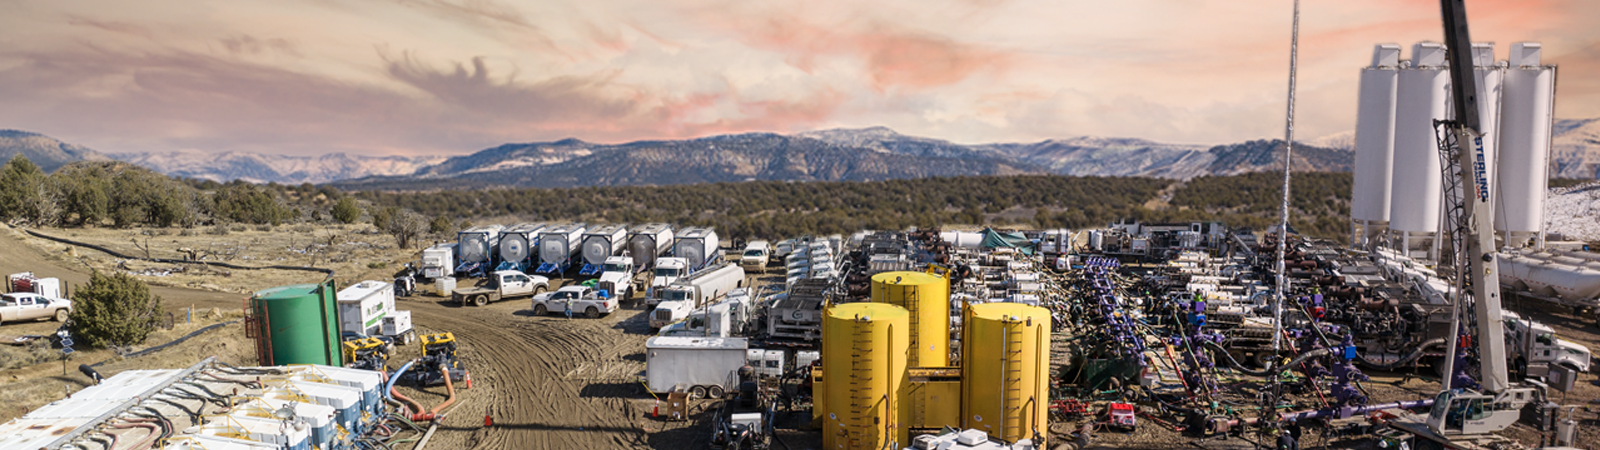 A hydraulic fracturing rig is shown in the foreground with mountains in the background.